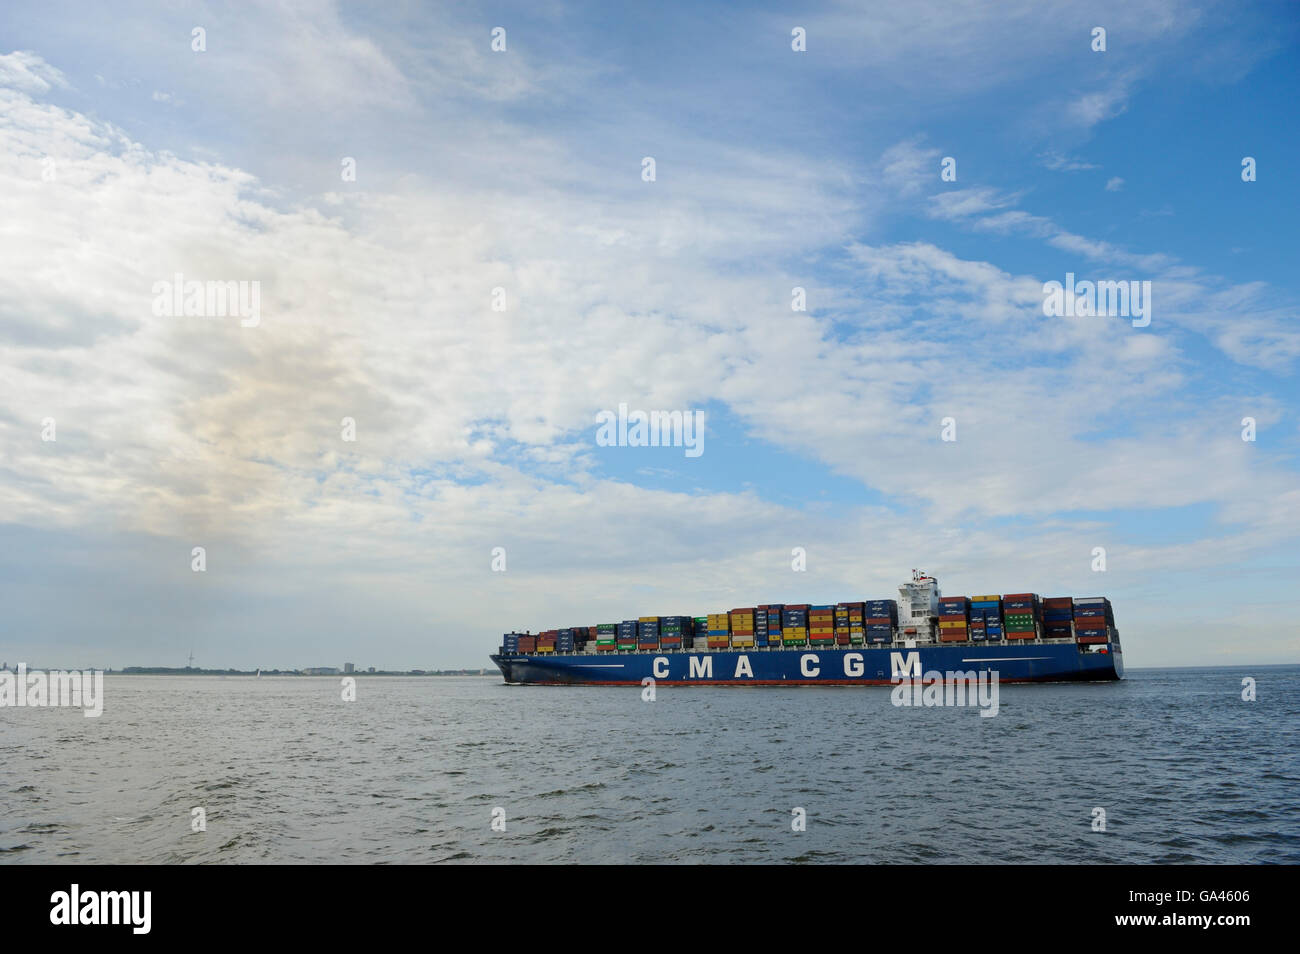 Container ship at the river Elbe, Cuxhaven, Germany Stock Photo